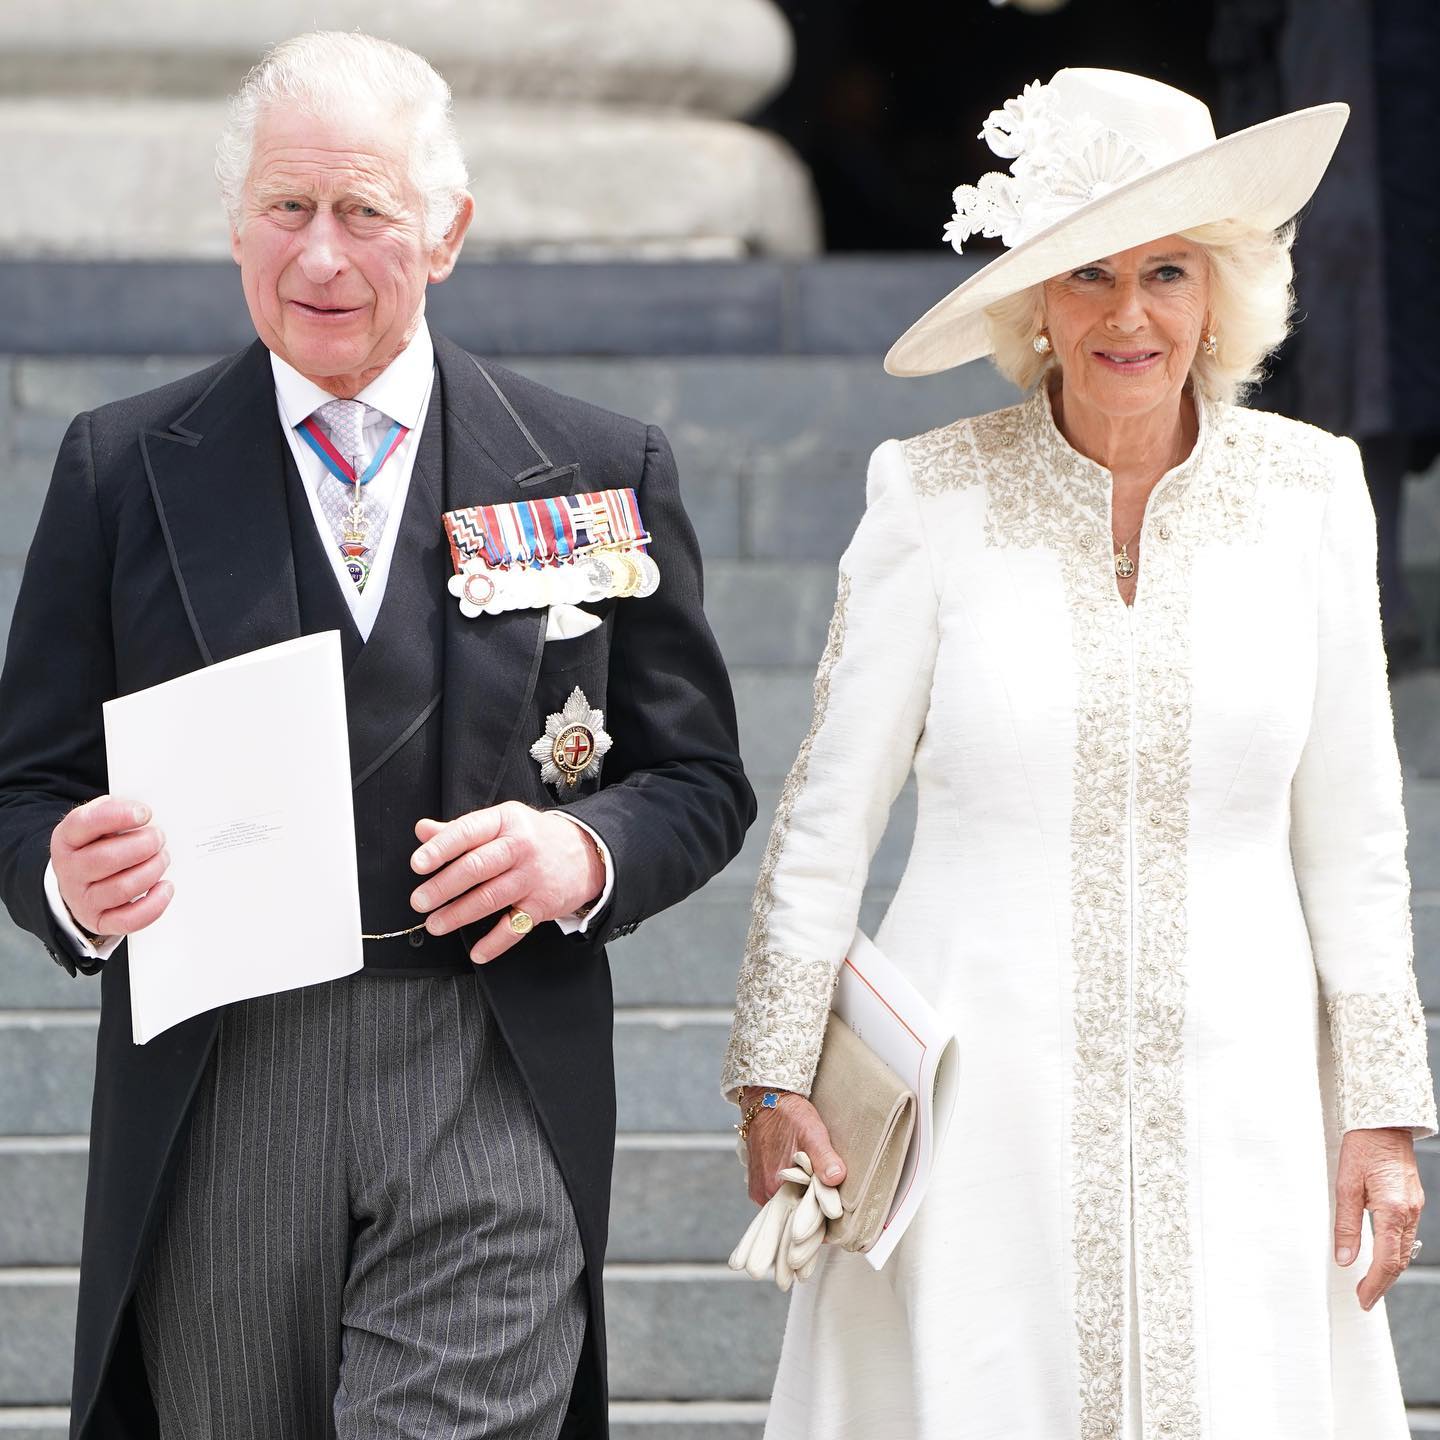 King Charles III in black tailcoat with pinned medals and Camilla in white wide brimmed hat and clothes